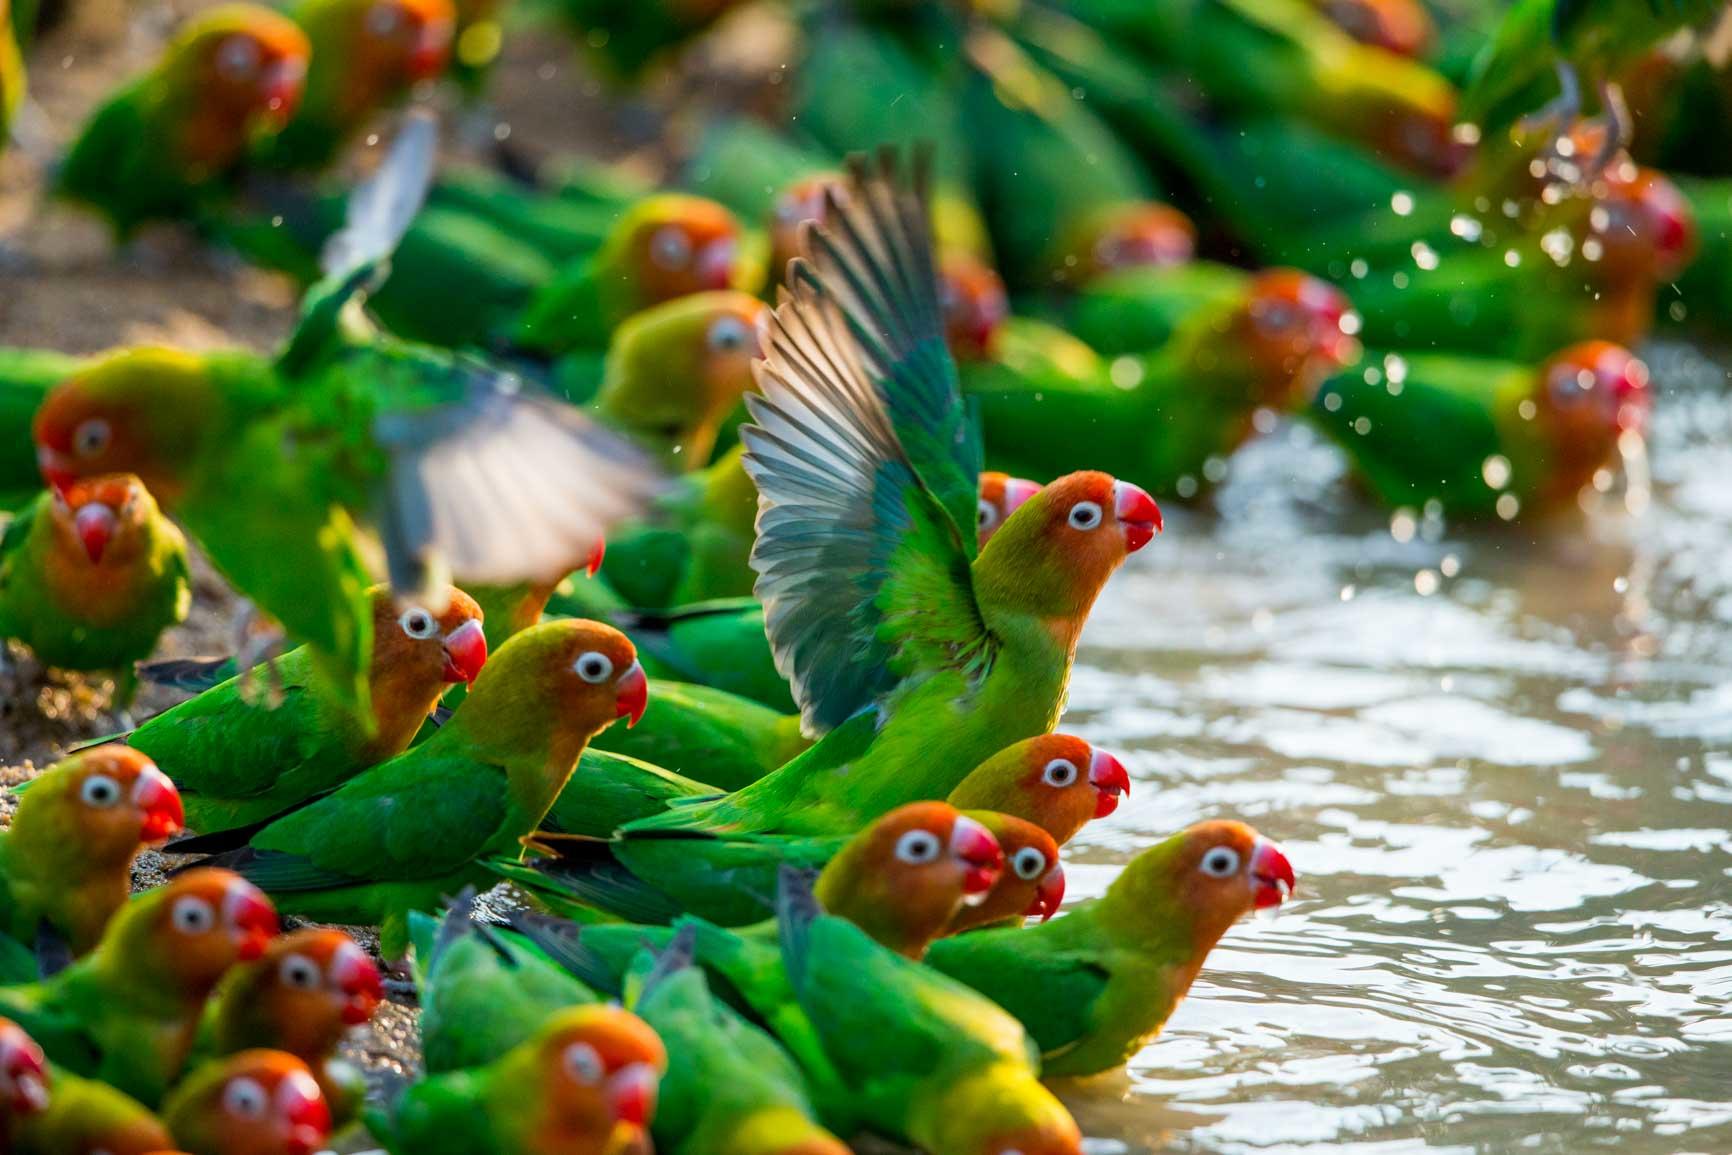 The Birds Of Zambia Will Take Your Breath Away